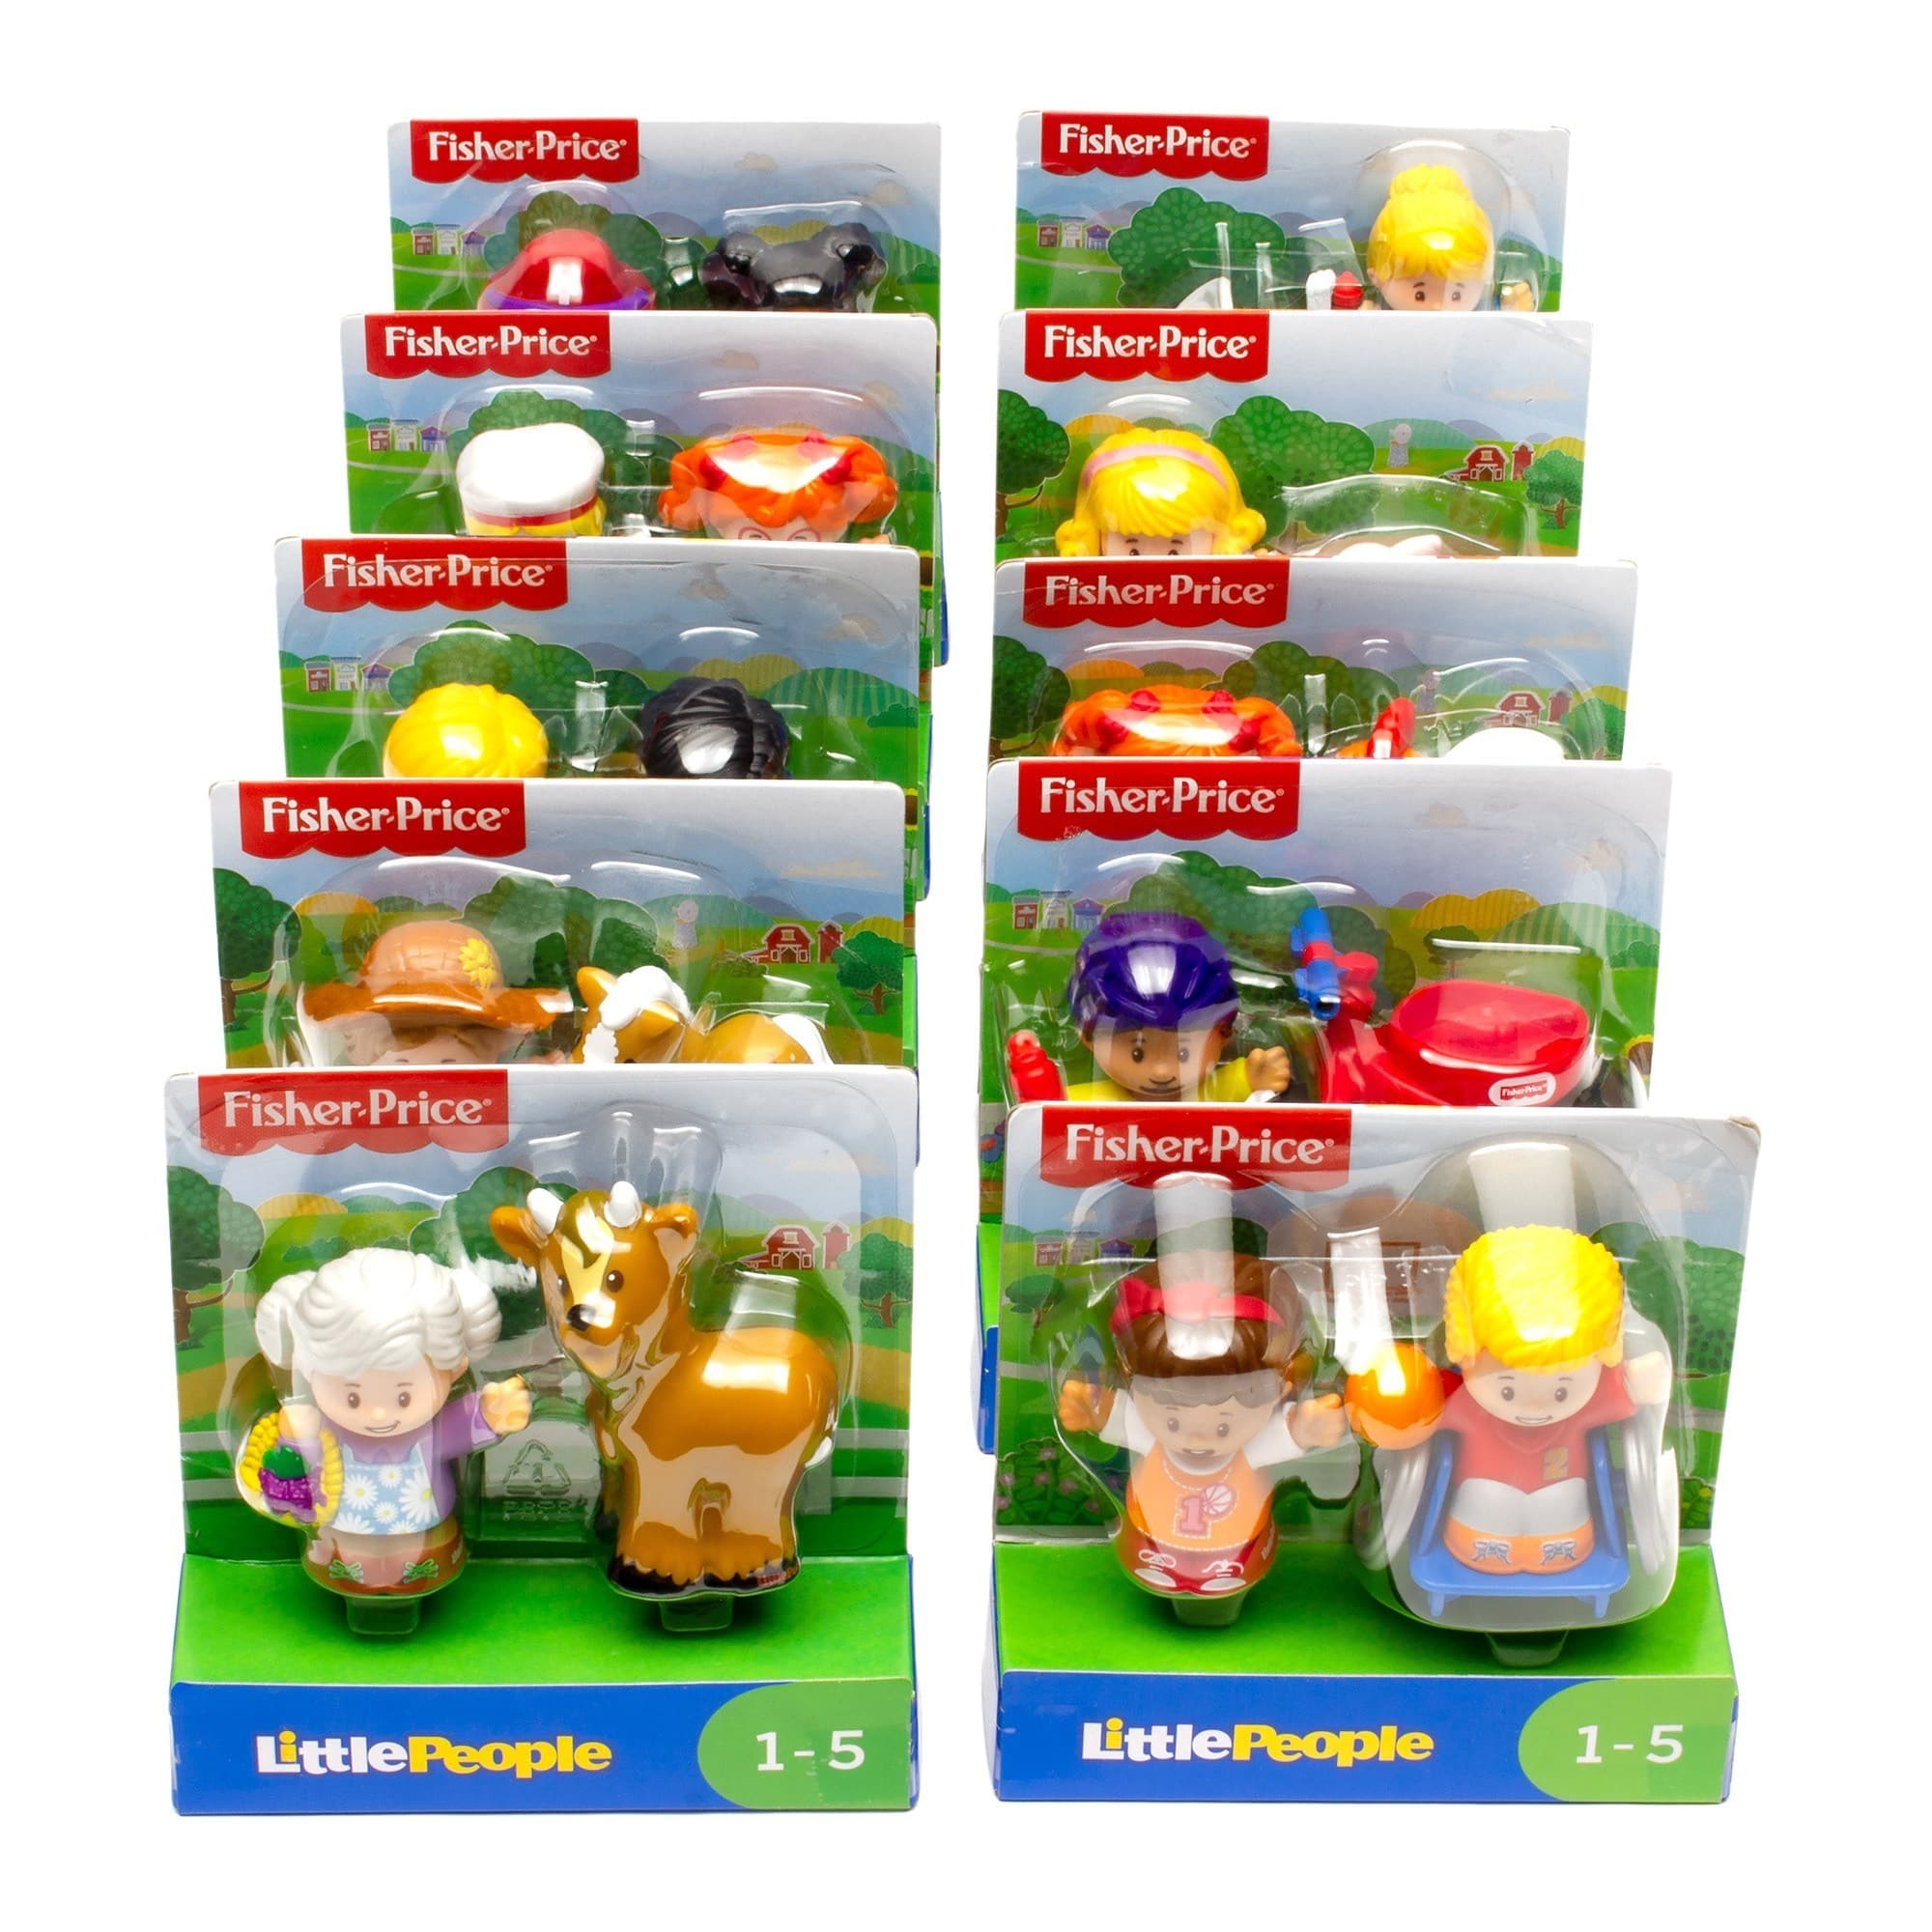 Fisher Price - Little People Figures - 2 Pack Assortment